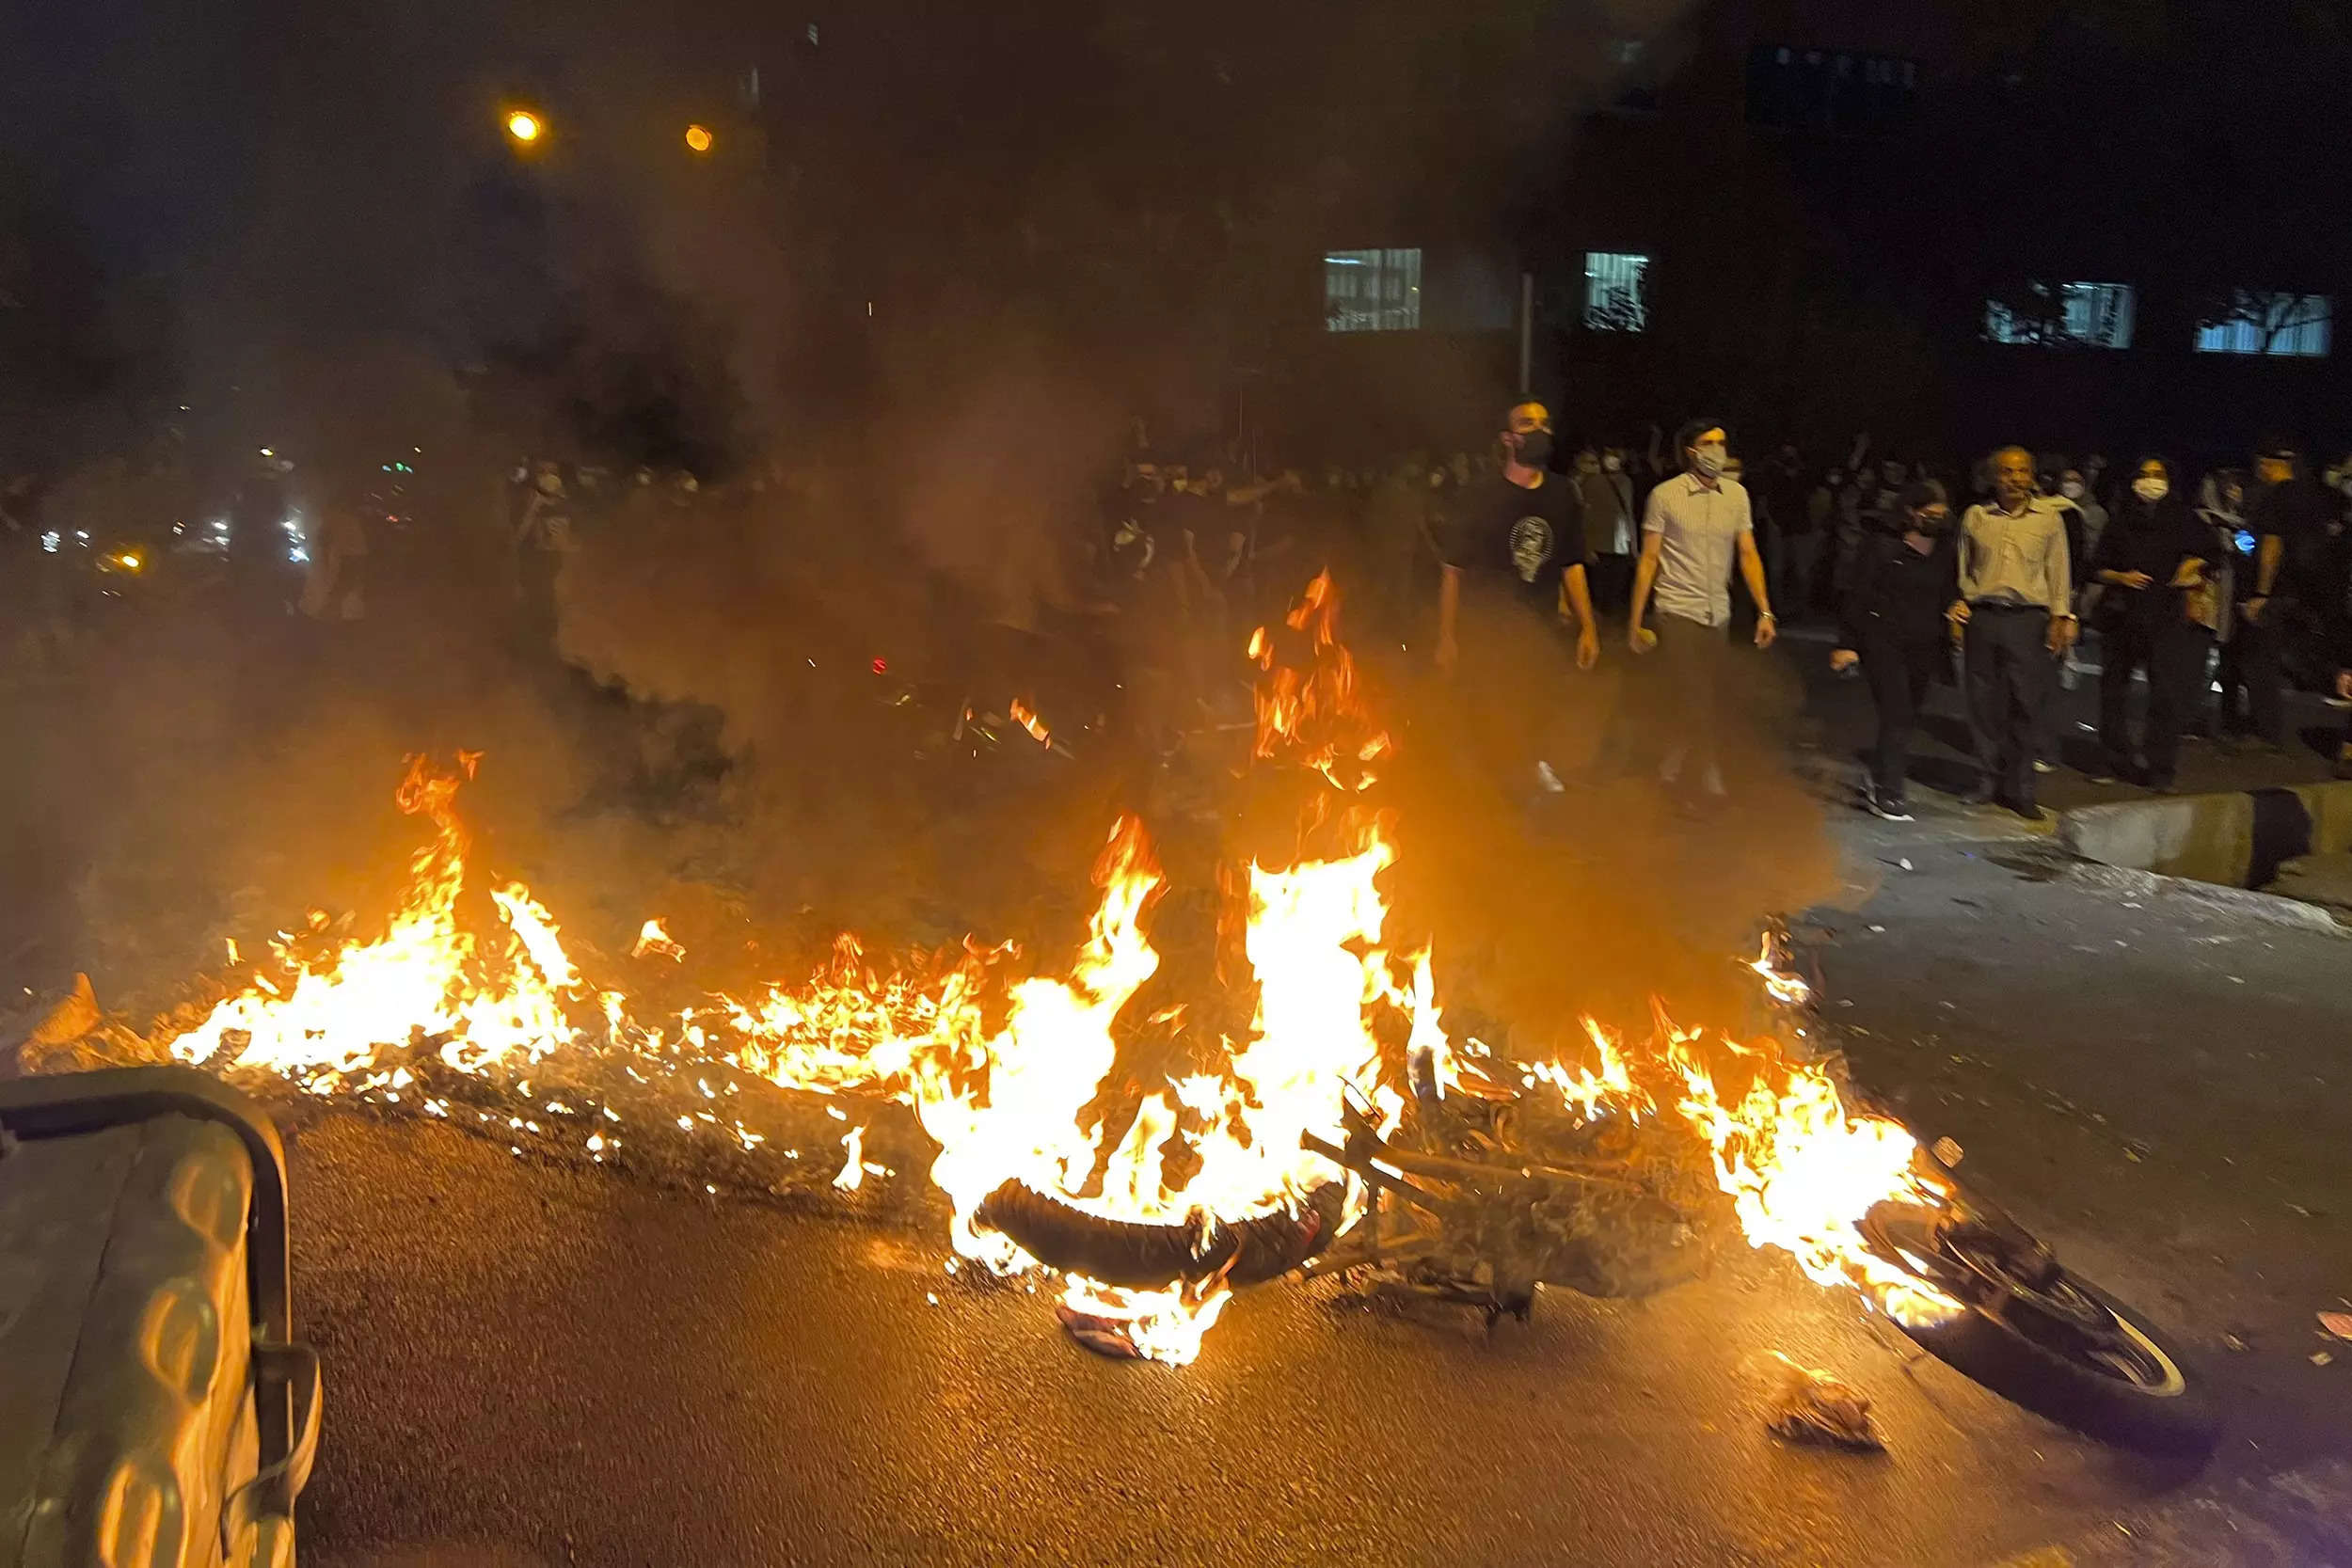 Women burn hijabs to protest Mahsa Amini's death as Iran witnesses widespread outrage. (File photo)